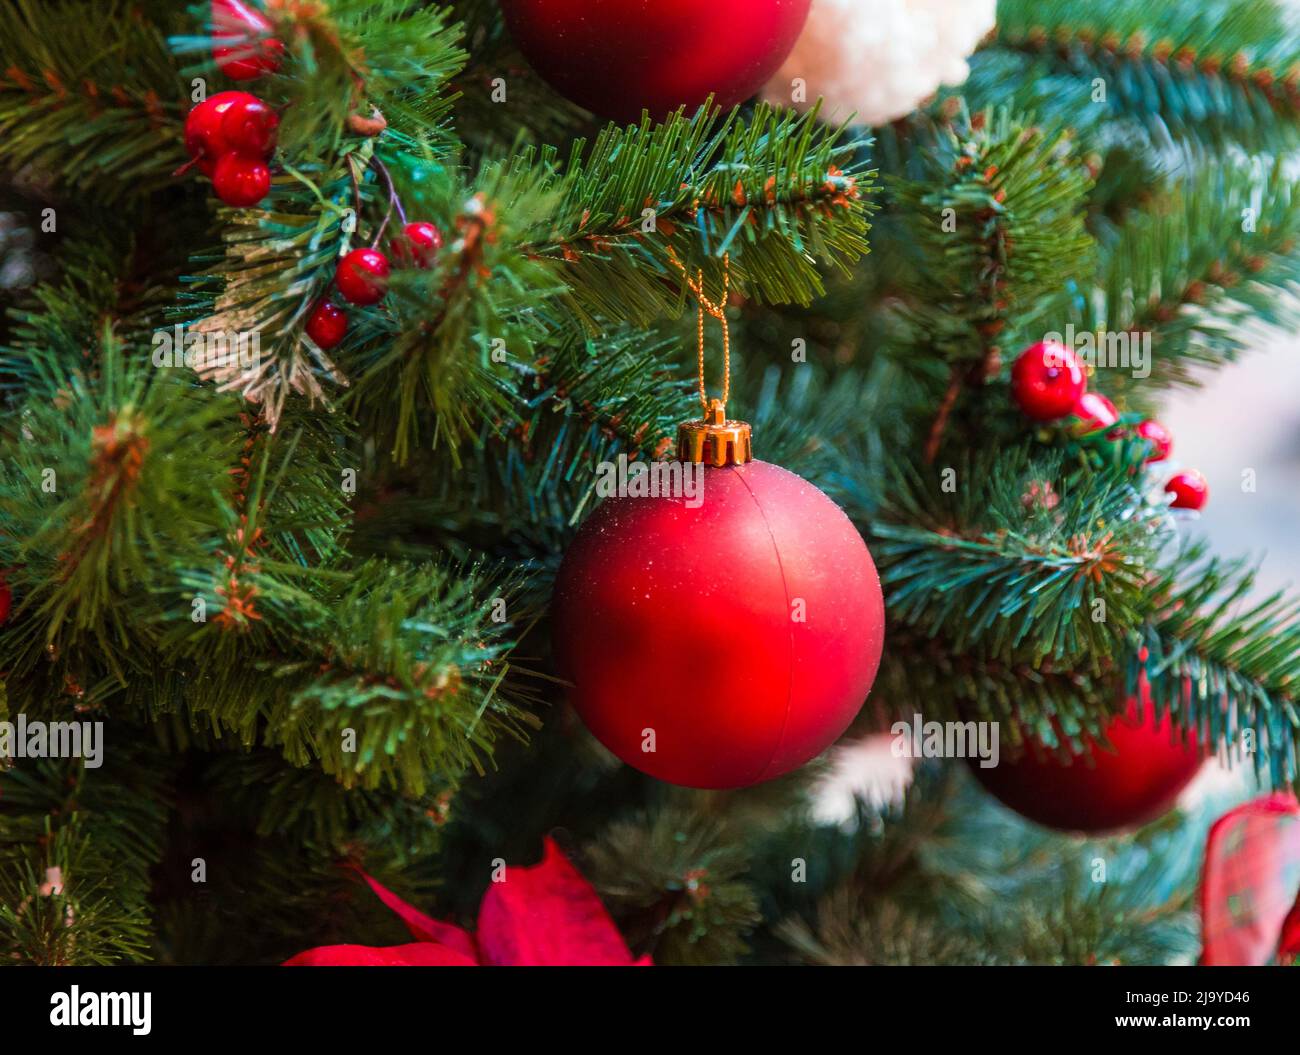 Christmas decorations on the branches of fir tree Stock Photo - Alamy